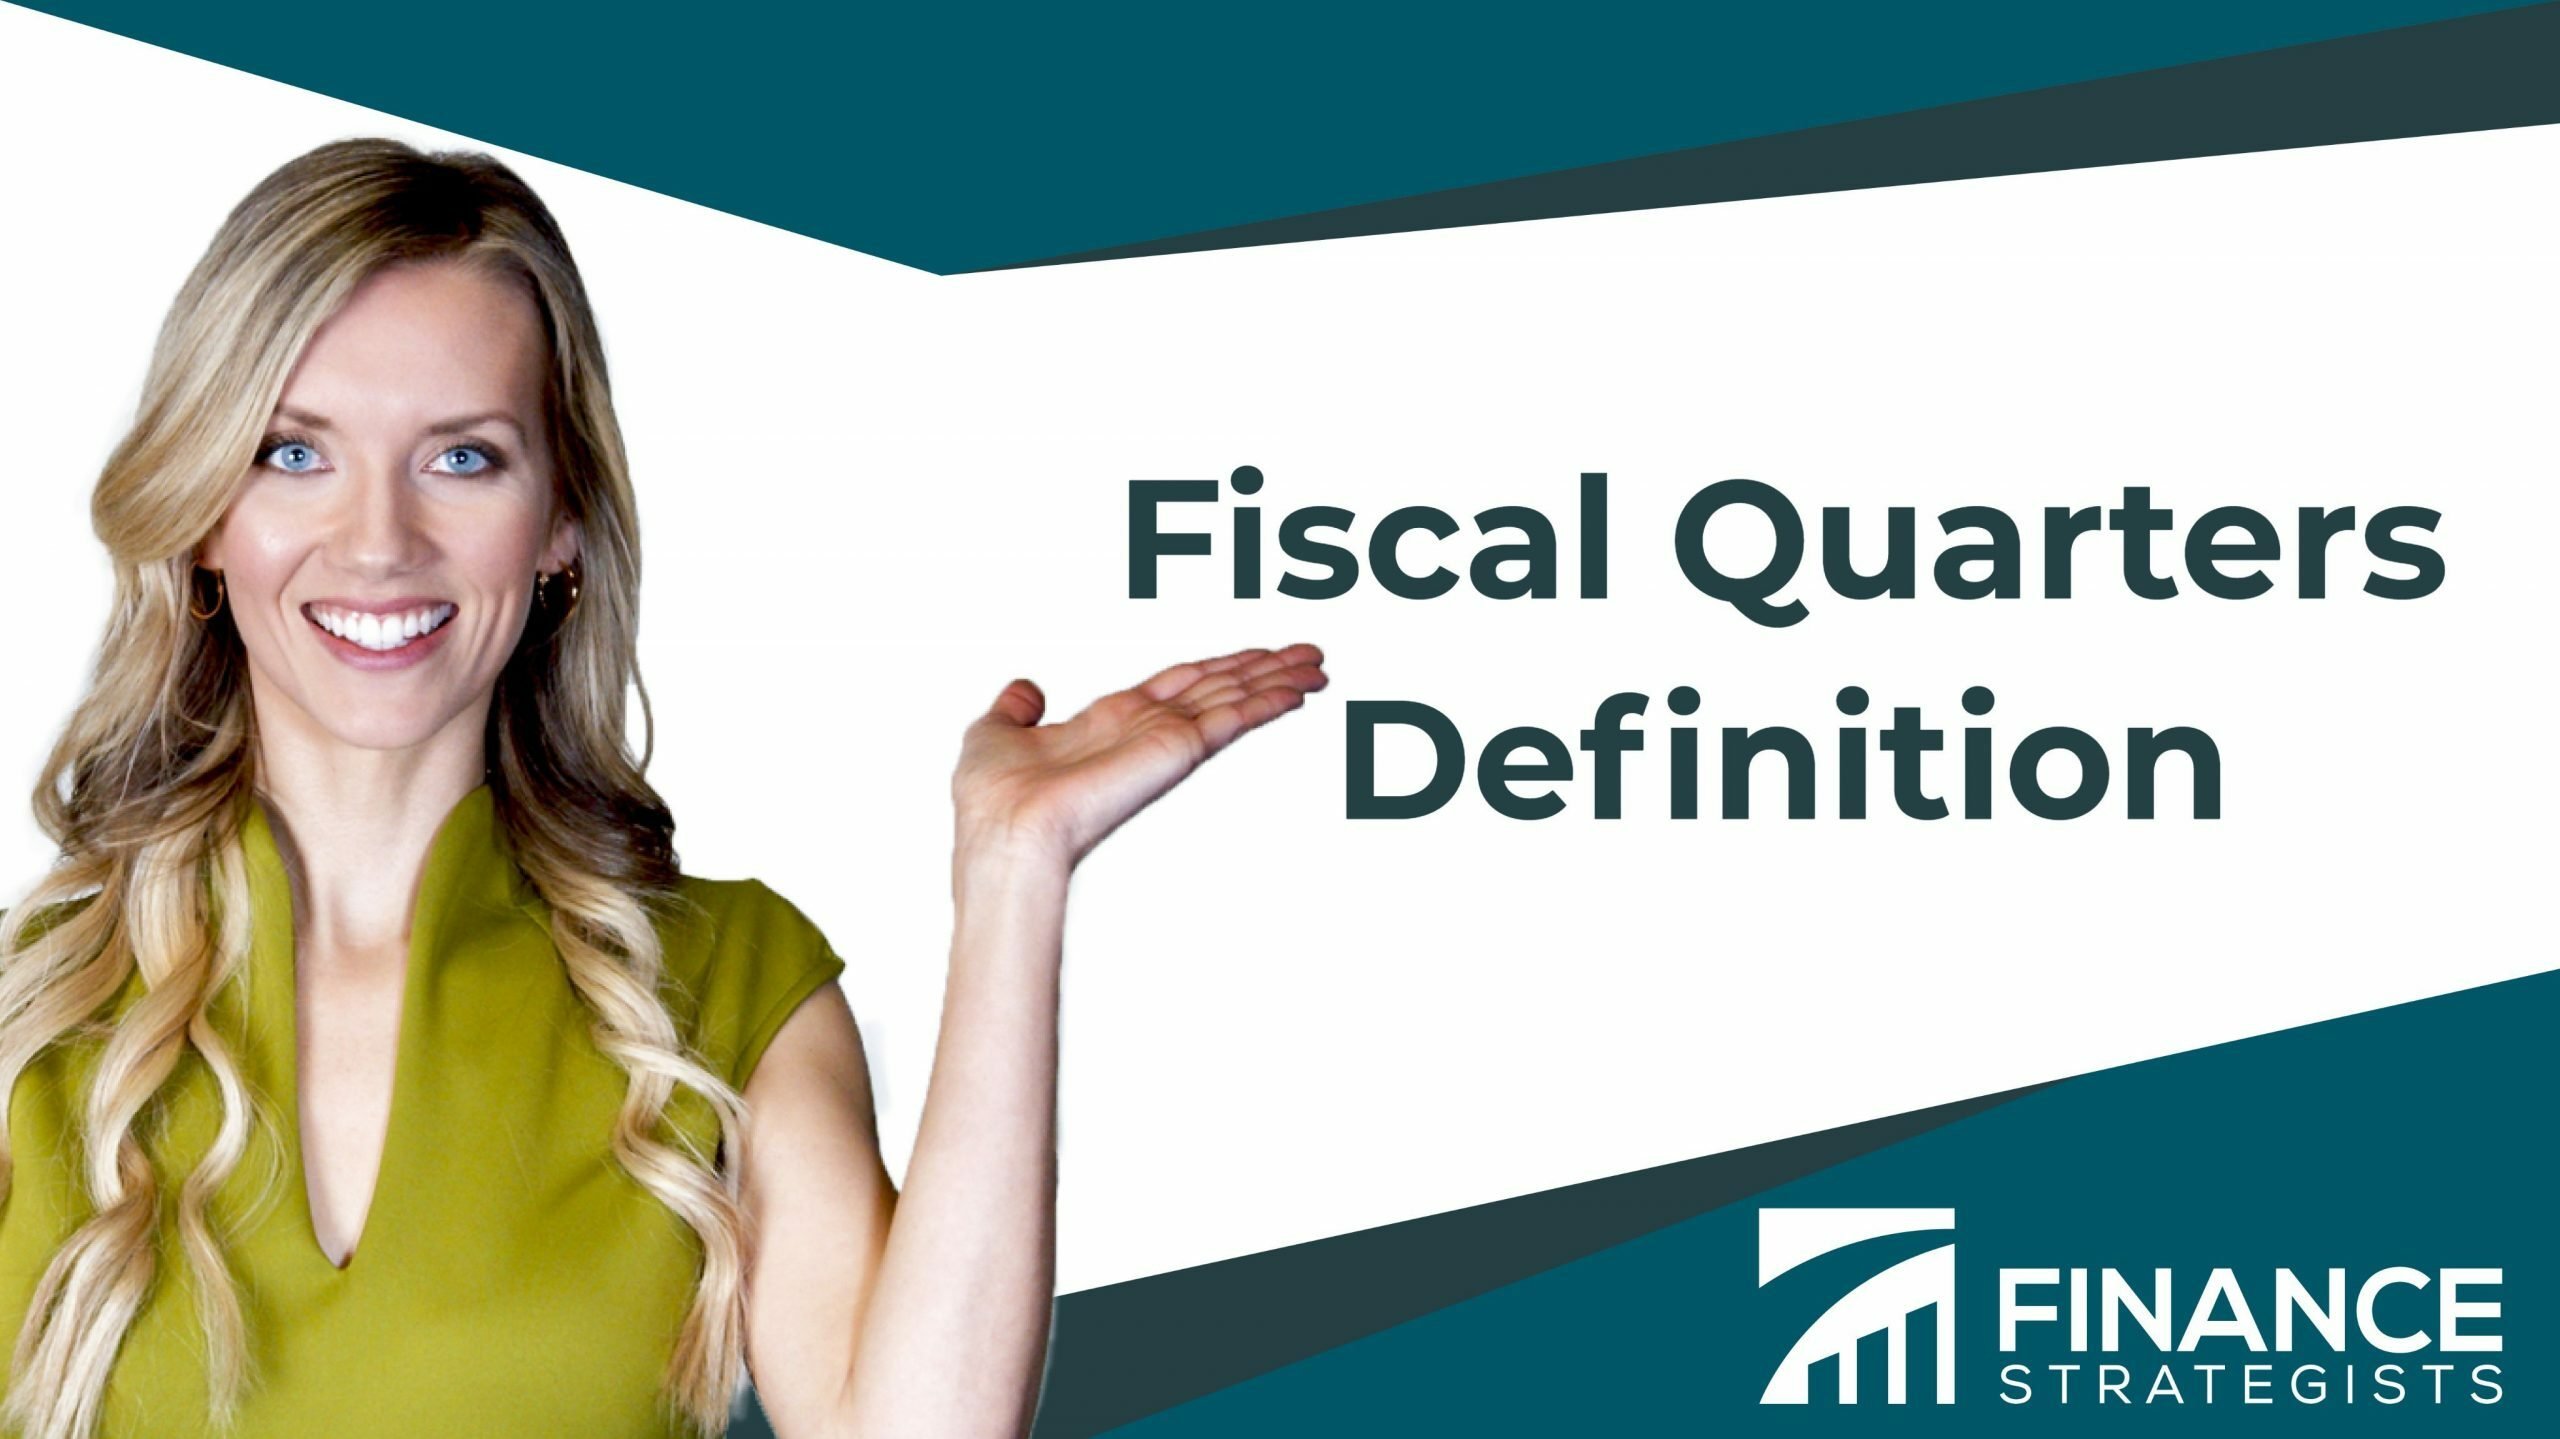 What Is Fiscal Quarter? Finance Strategists